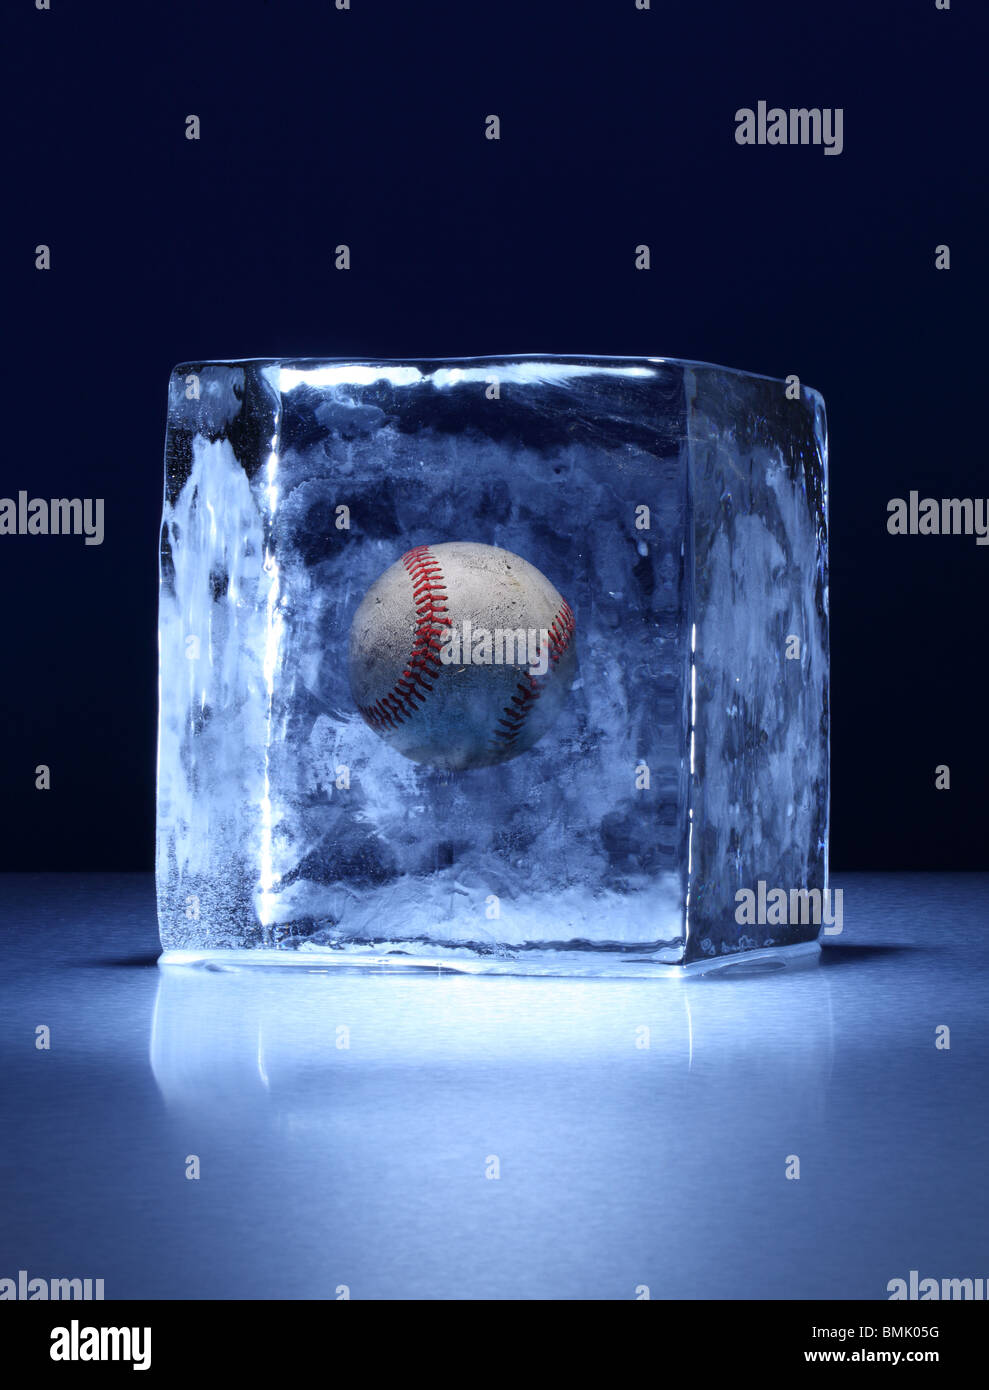 A frozen block of ice with baseball frozen inside on a metal surface Stock Photo